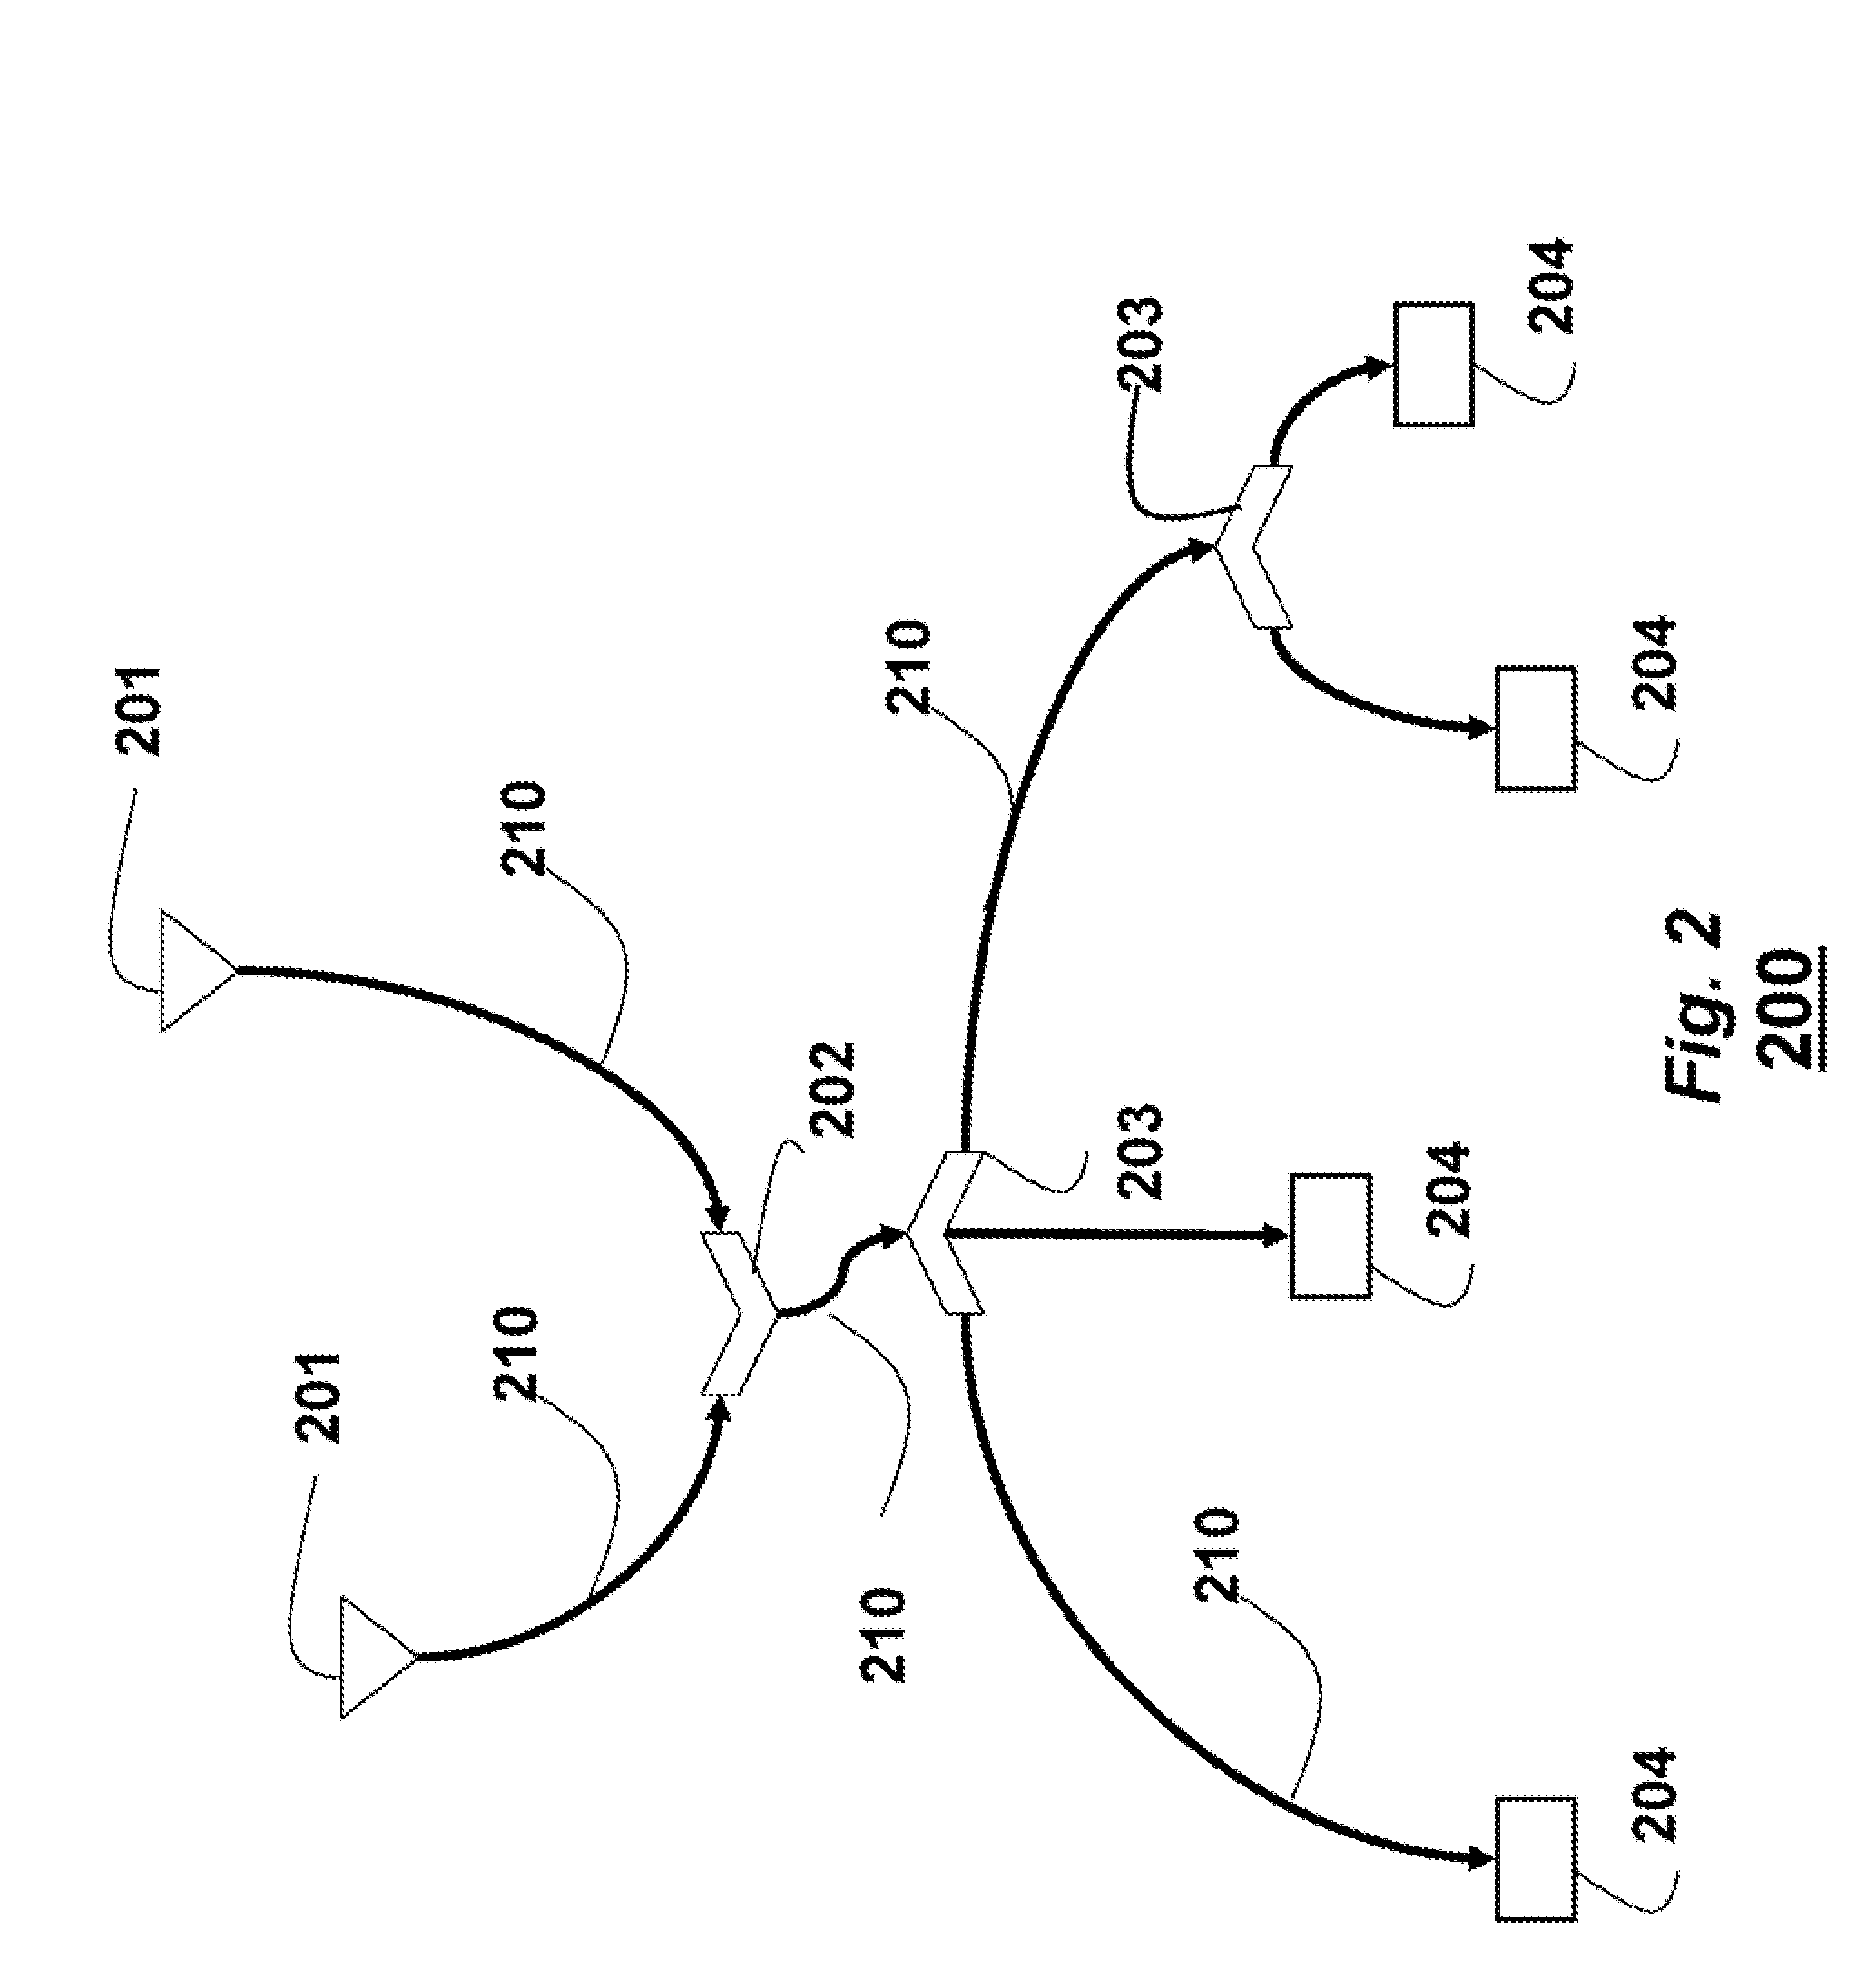 Surveillance System and Method for Tracking and Identifying Objects in Environments